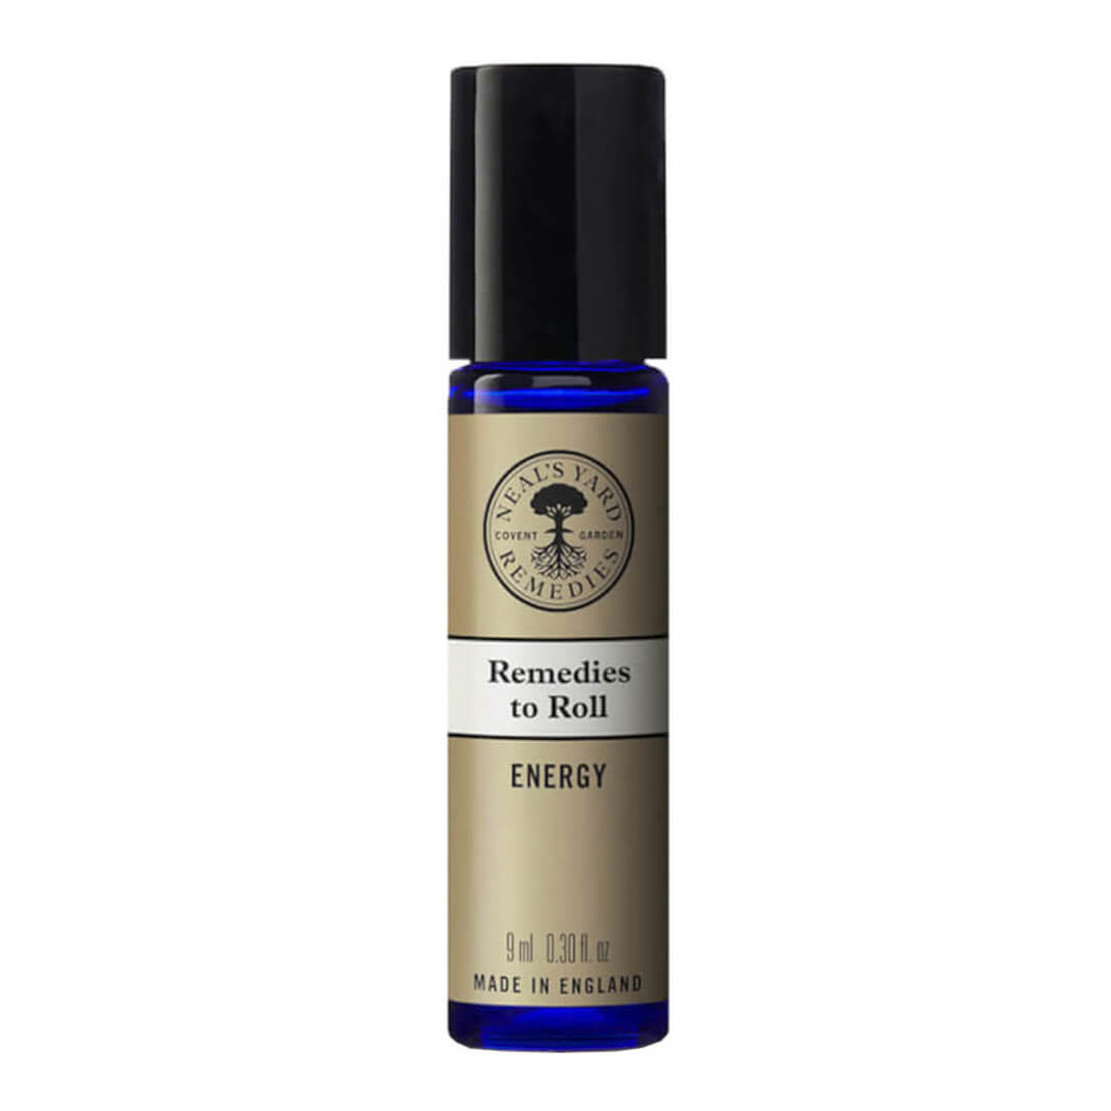 Neal's Yard Remedies Energy Remedies To Roll 9ml